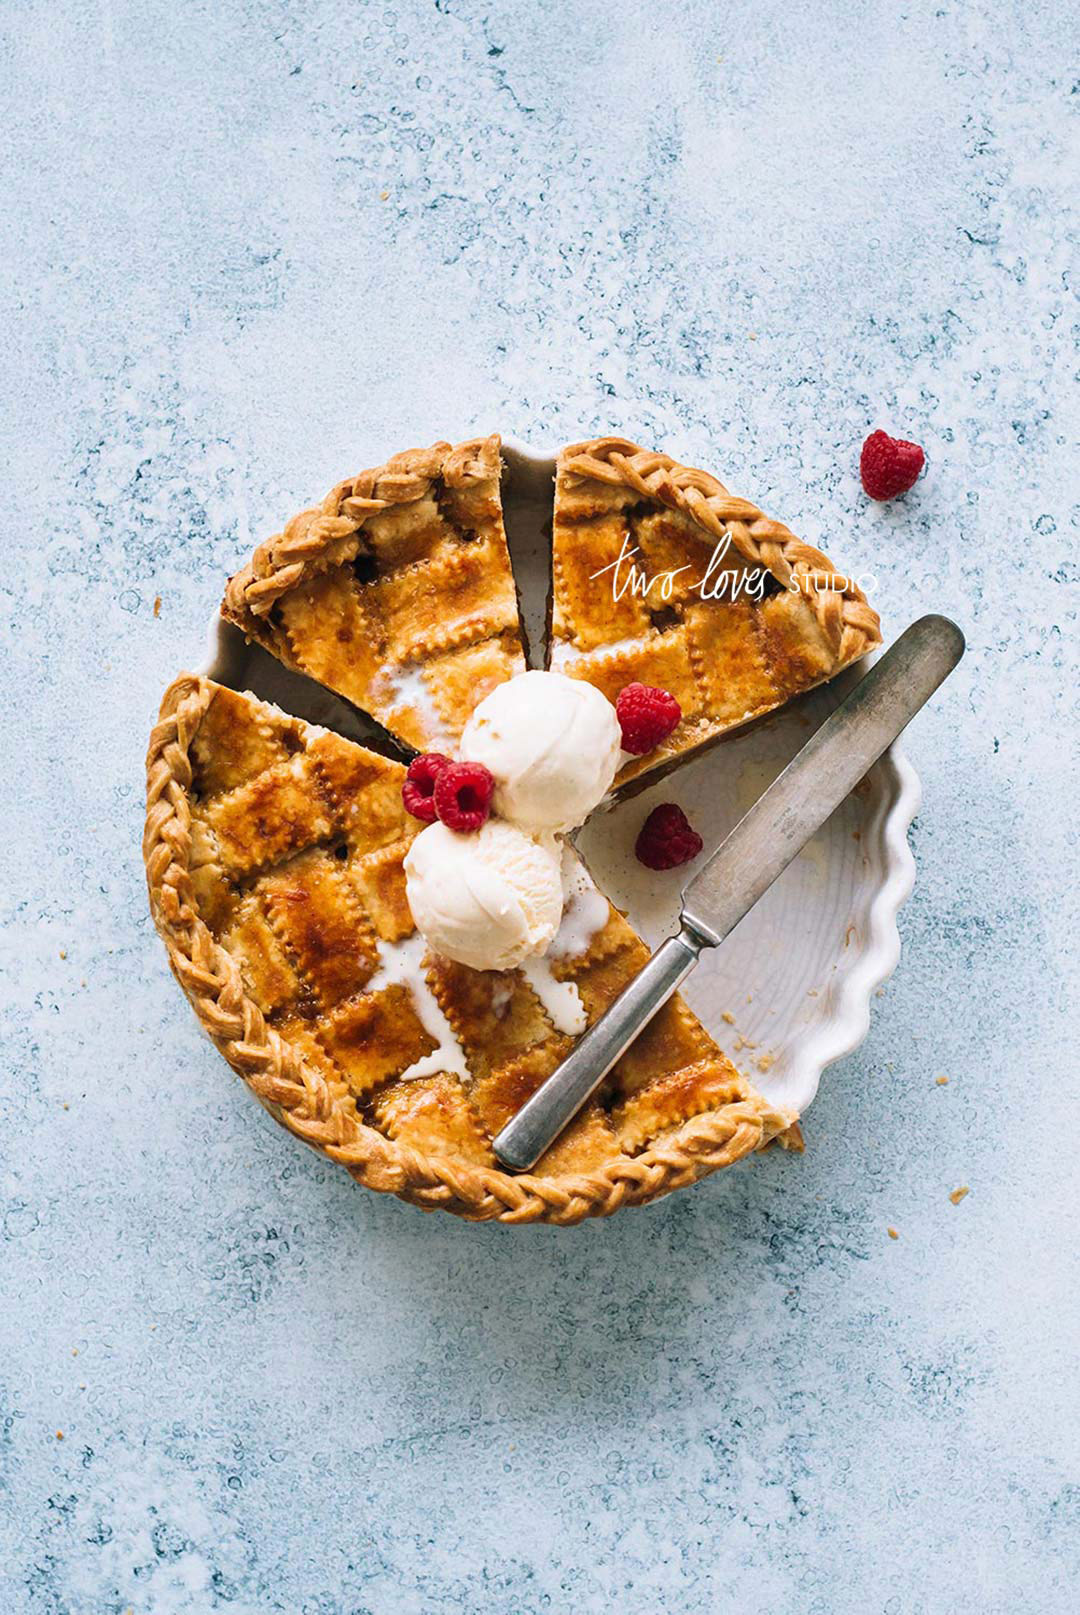 7 Food Styling Tips For Photo-worthy Pie Crust